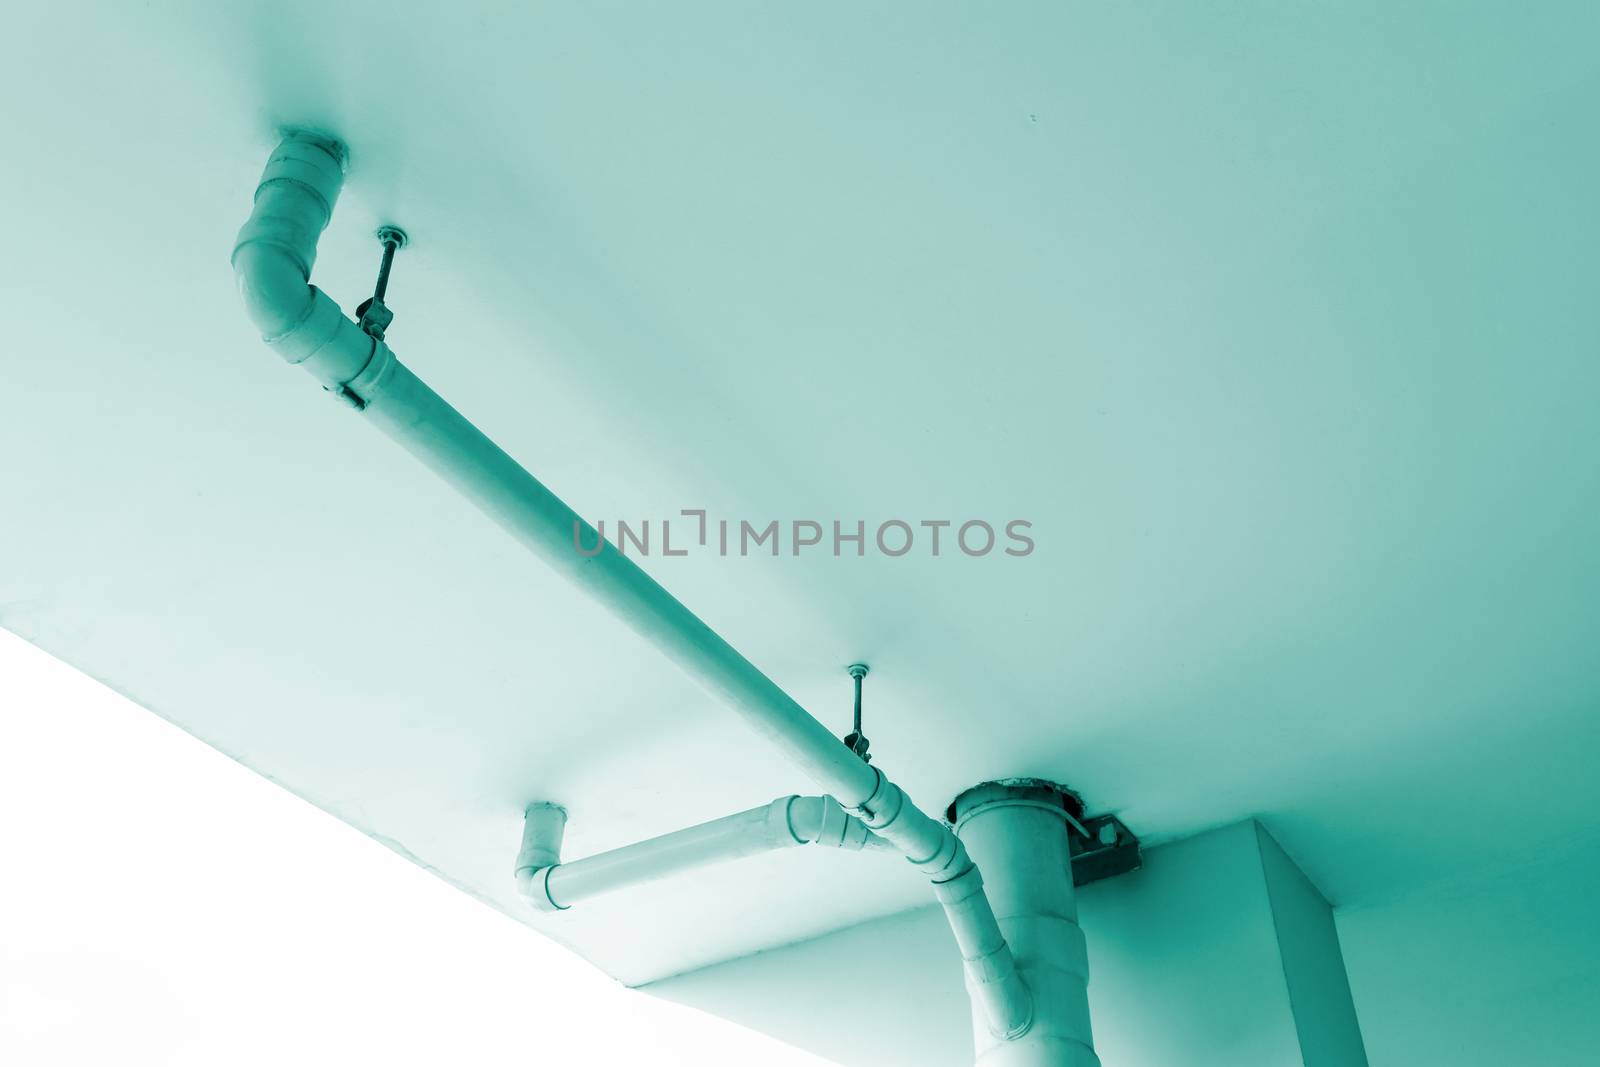 under ceiling sewer pipes or drain pipes system in modern building